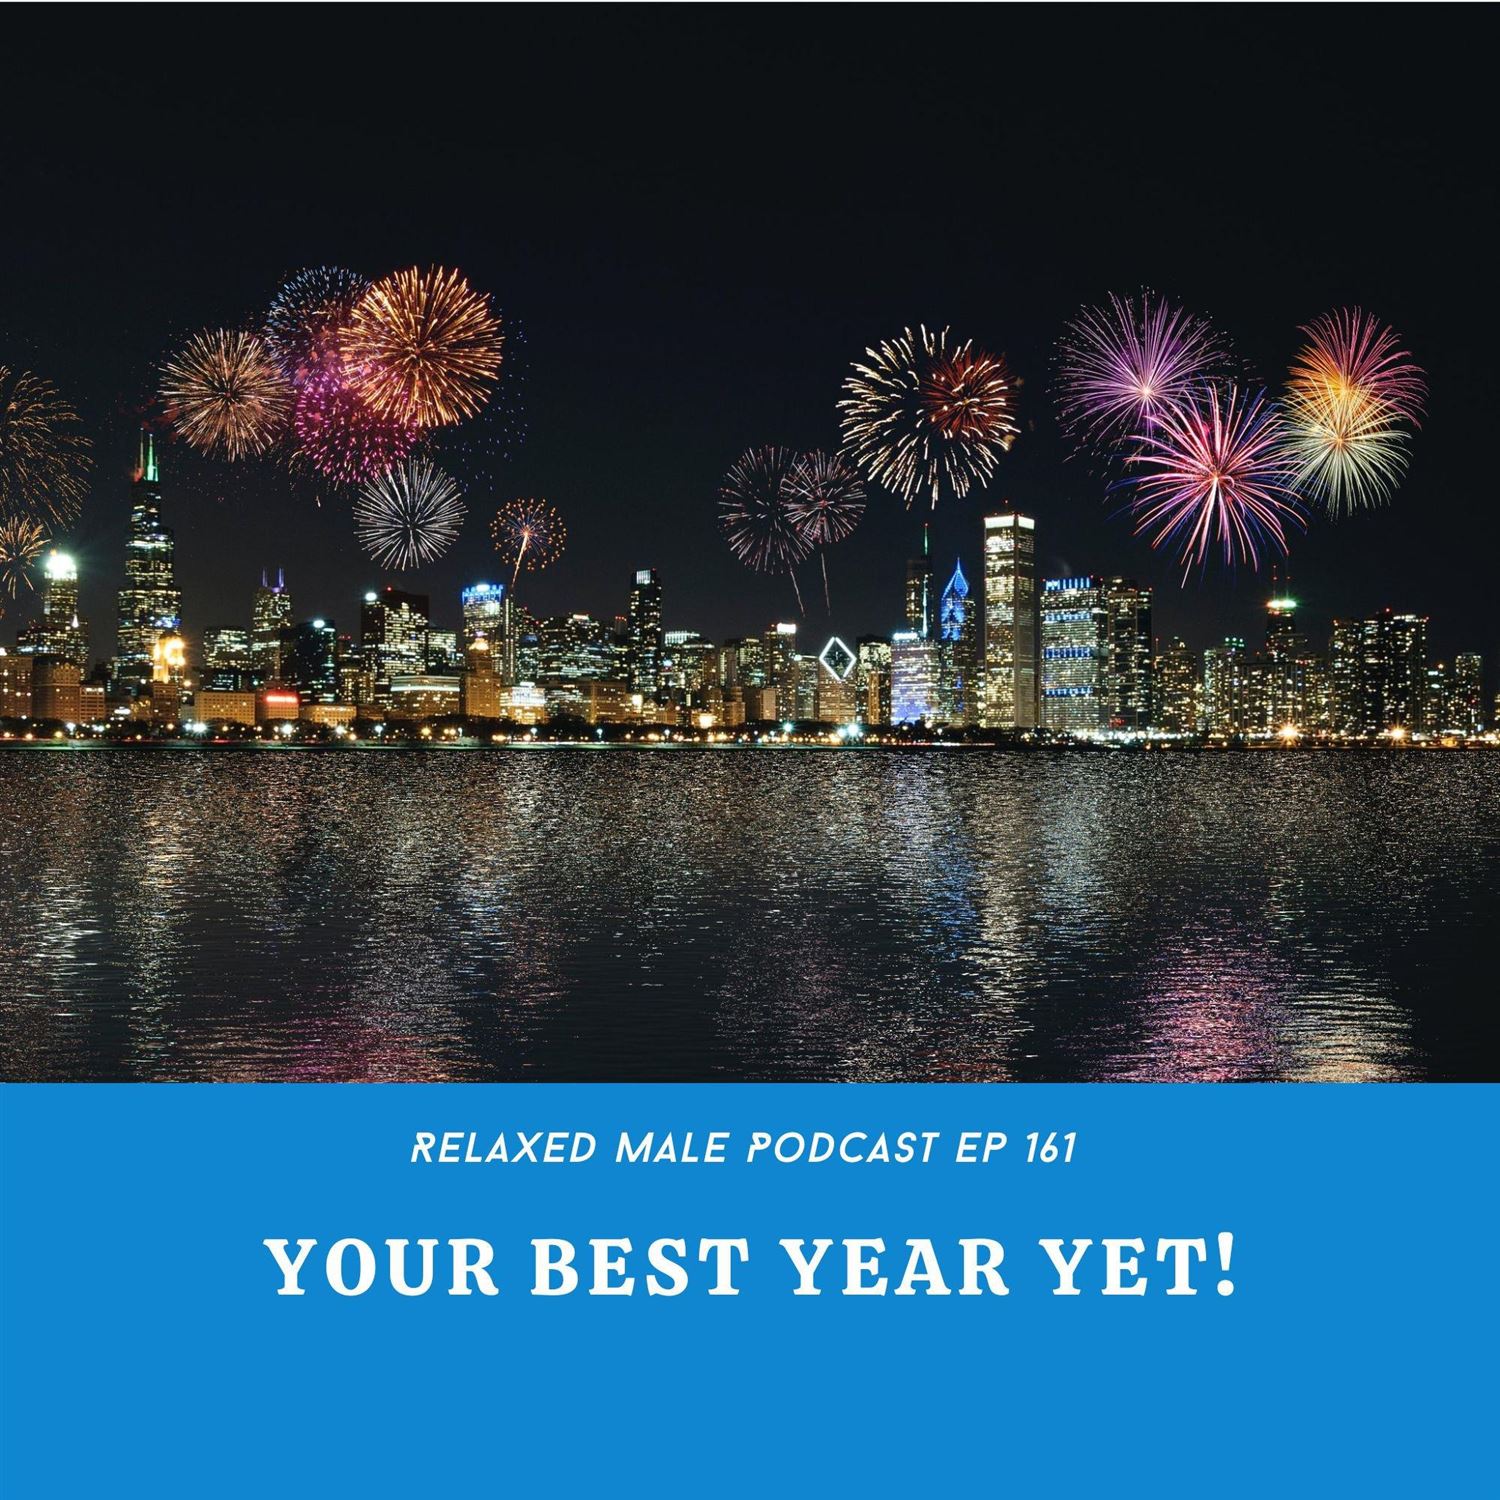 Your Best Year Yet!